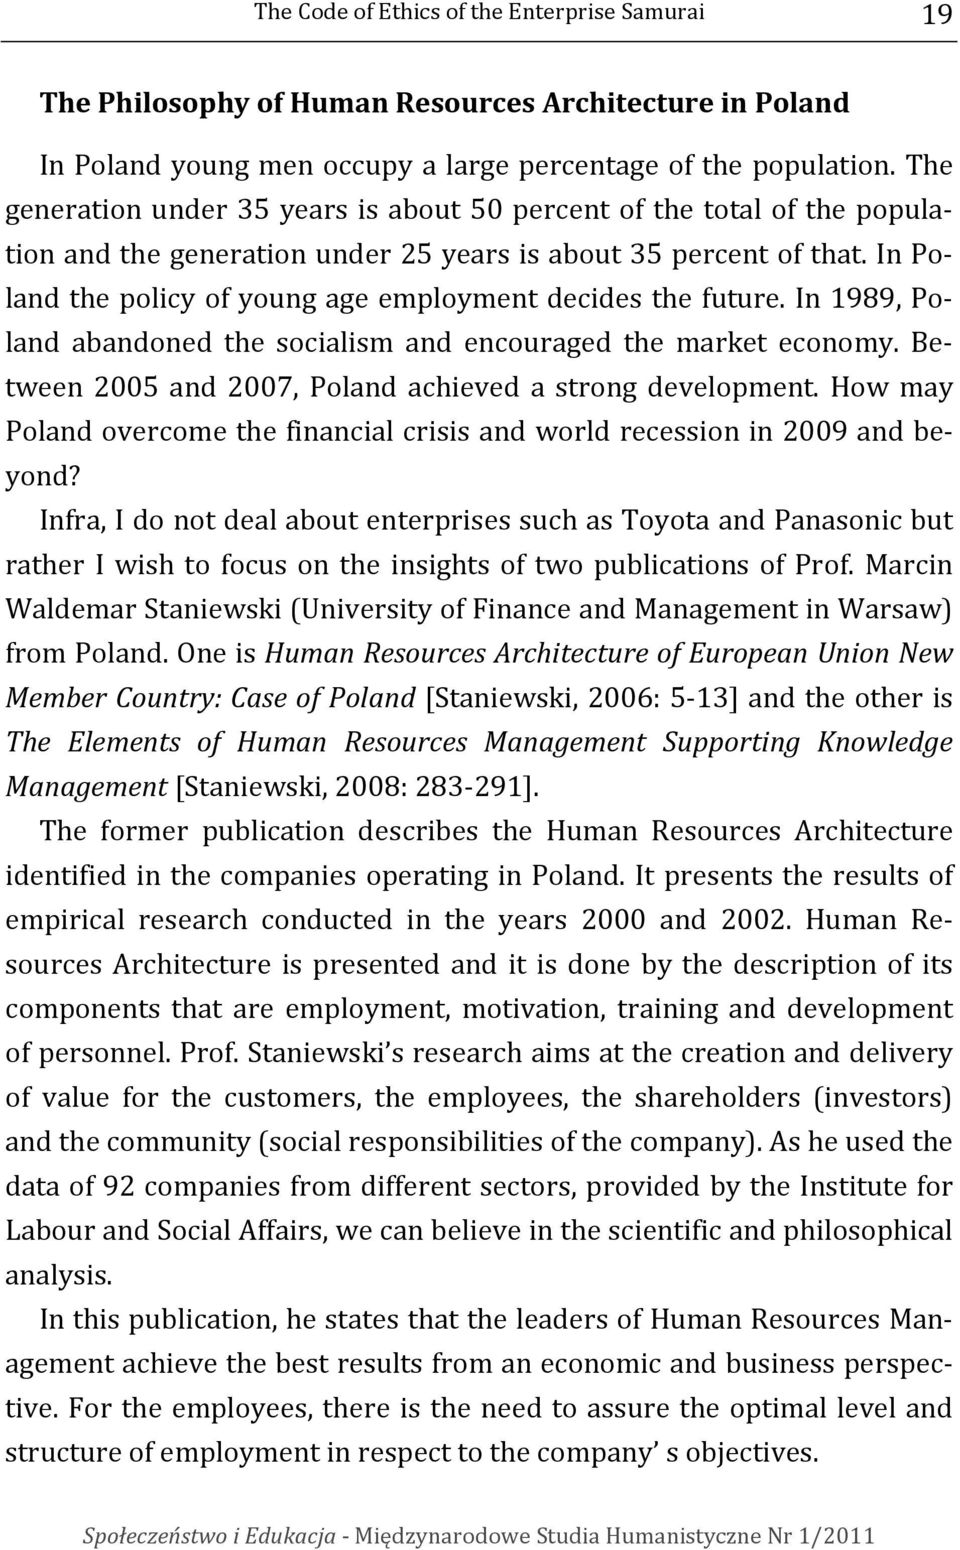 In Poland the policy of young age employment decides the future. In 1989, Poland abandoned the socialism and encouraged the market economy. Between 2005 and 2007, Poland achieved a strong development.